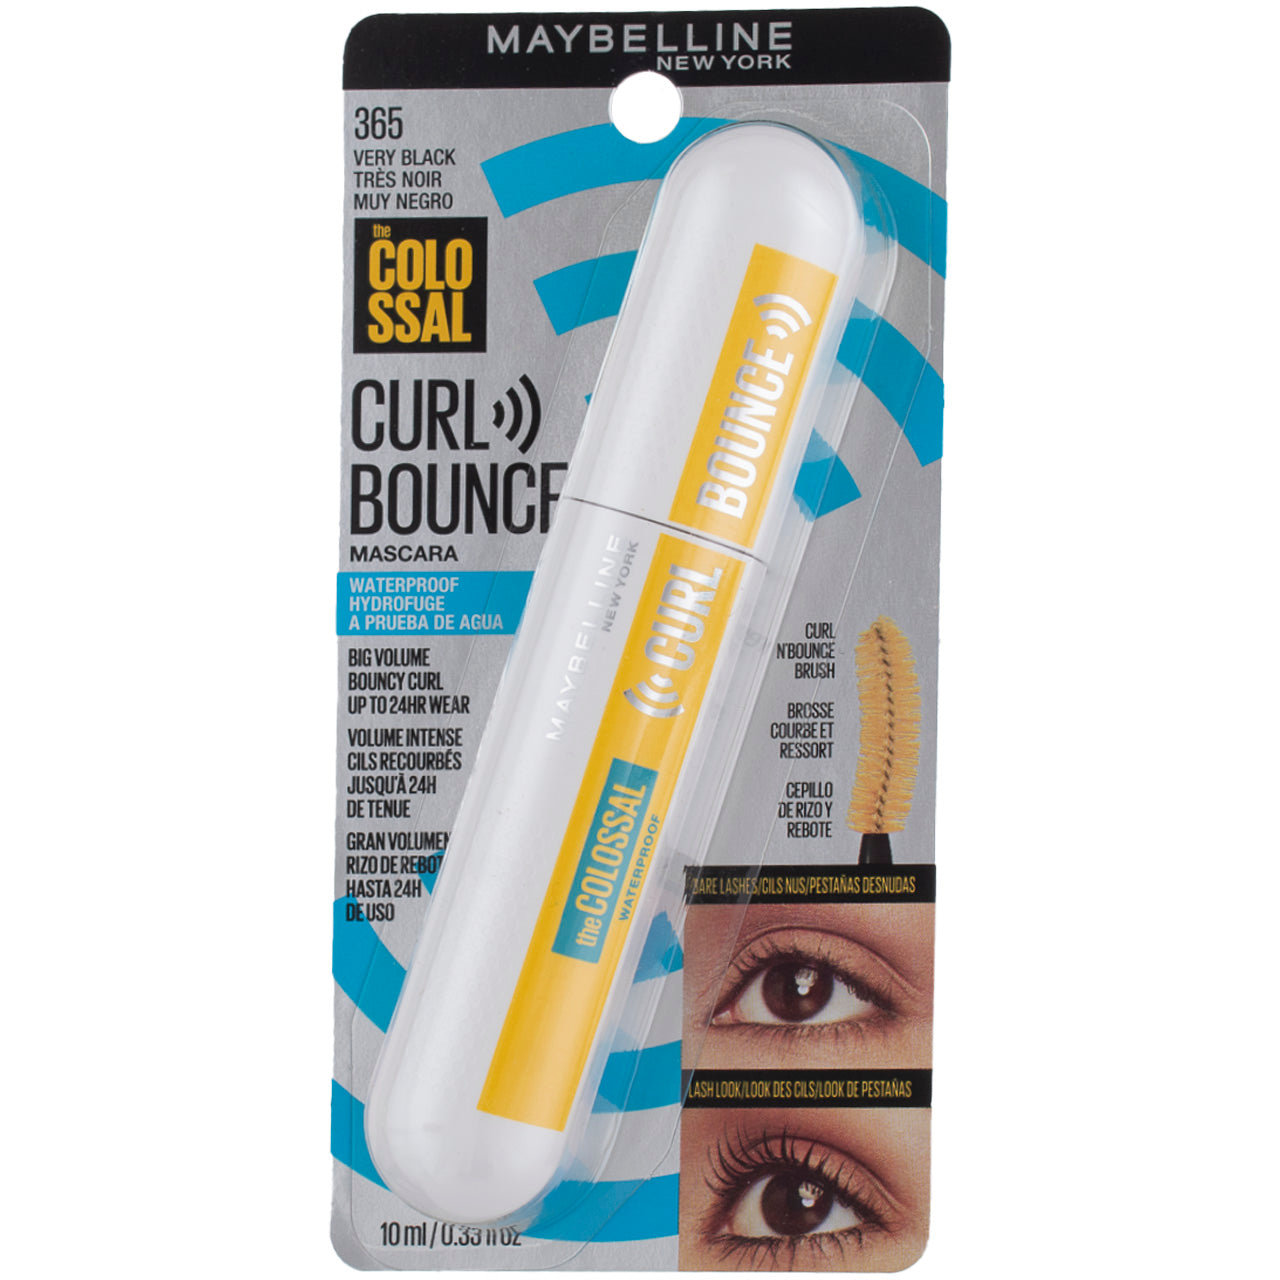 Maybelline The Colossal Curl Bouncing Mascara, Very Black 365, 0.33 fl –  Vitabox